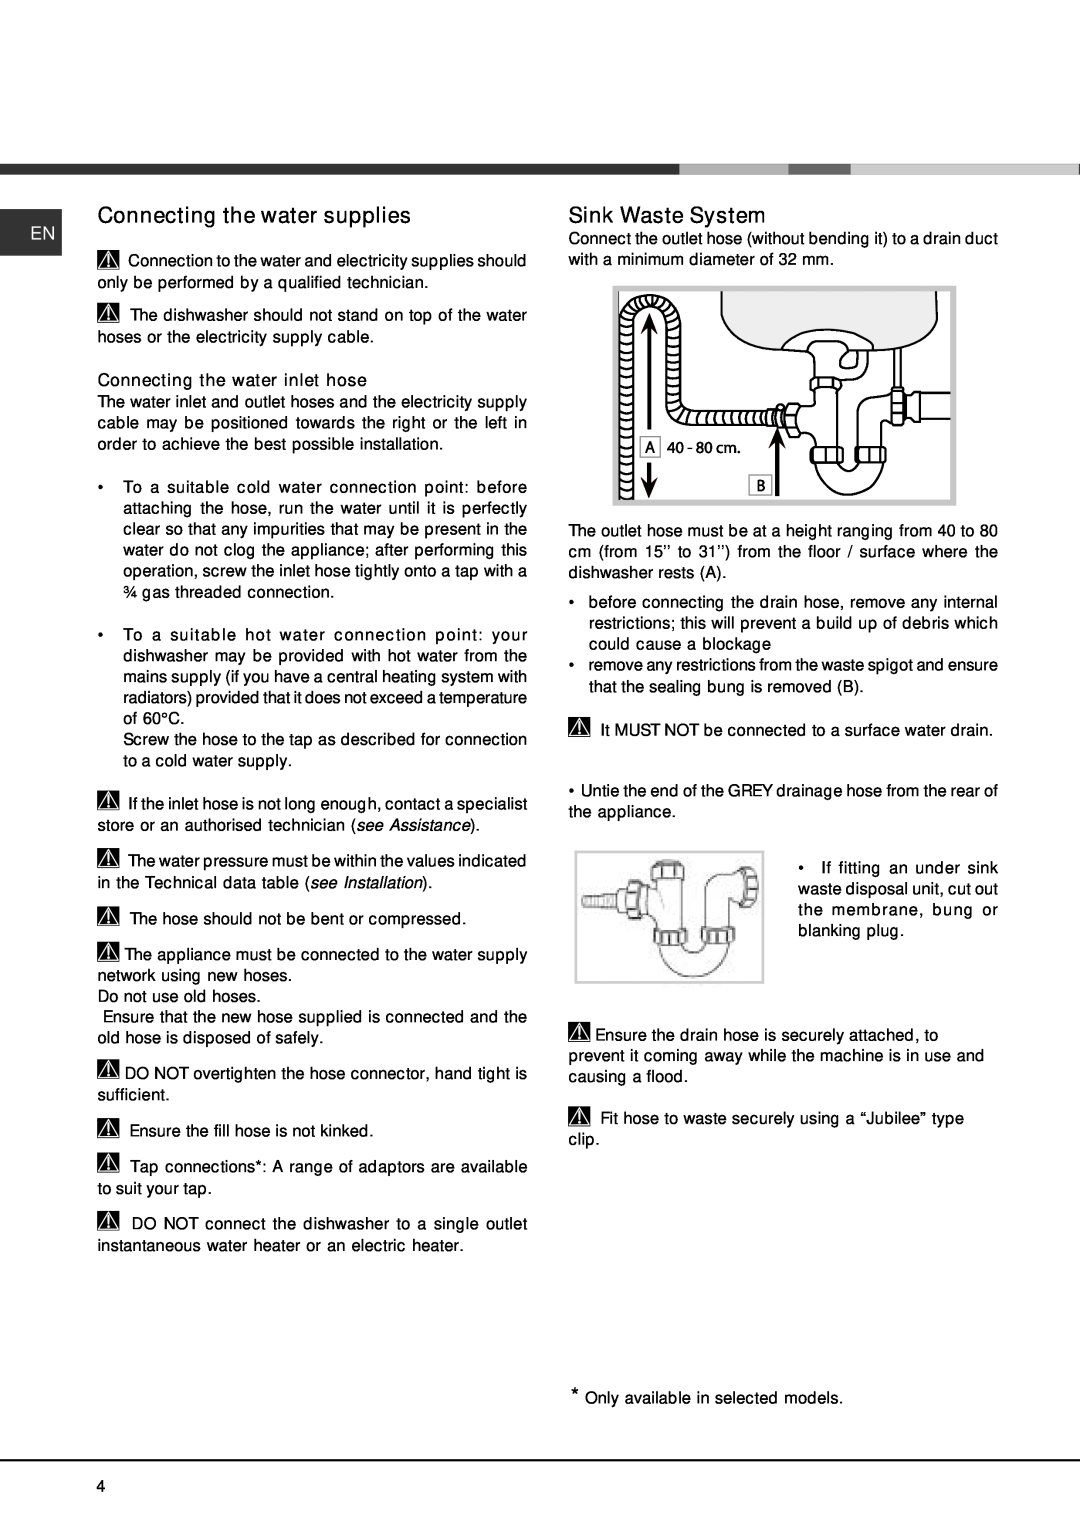 Hotpoint 910 manual Connecting the water supplies, Sink Waste System, Connecting the water inlet hose 